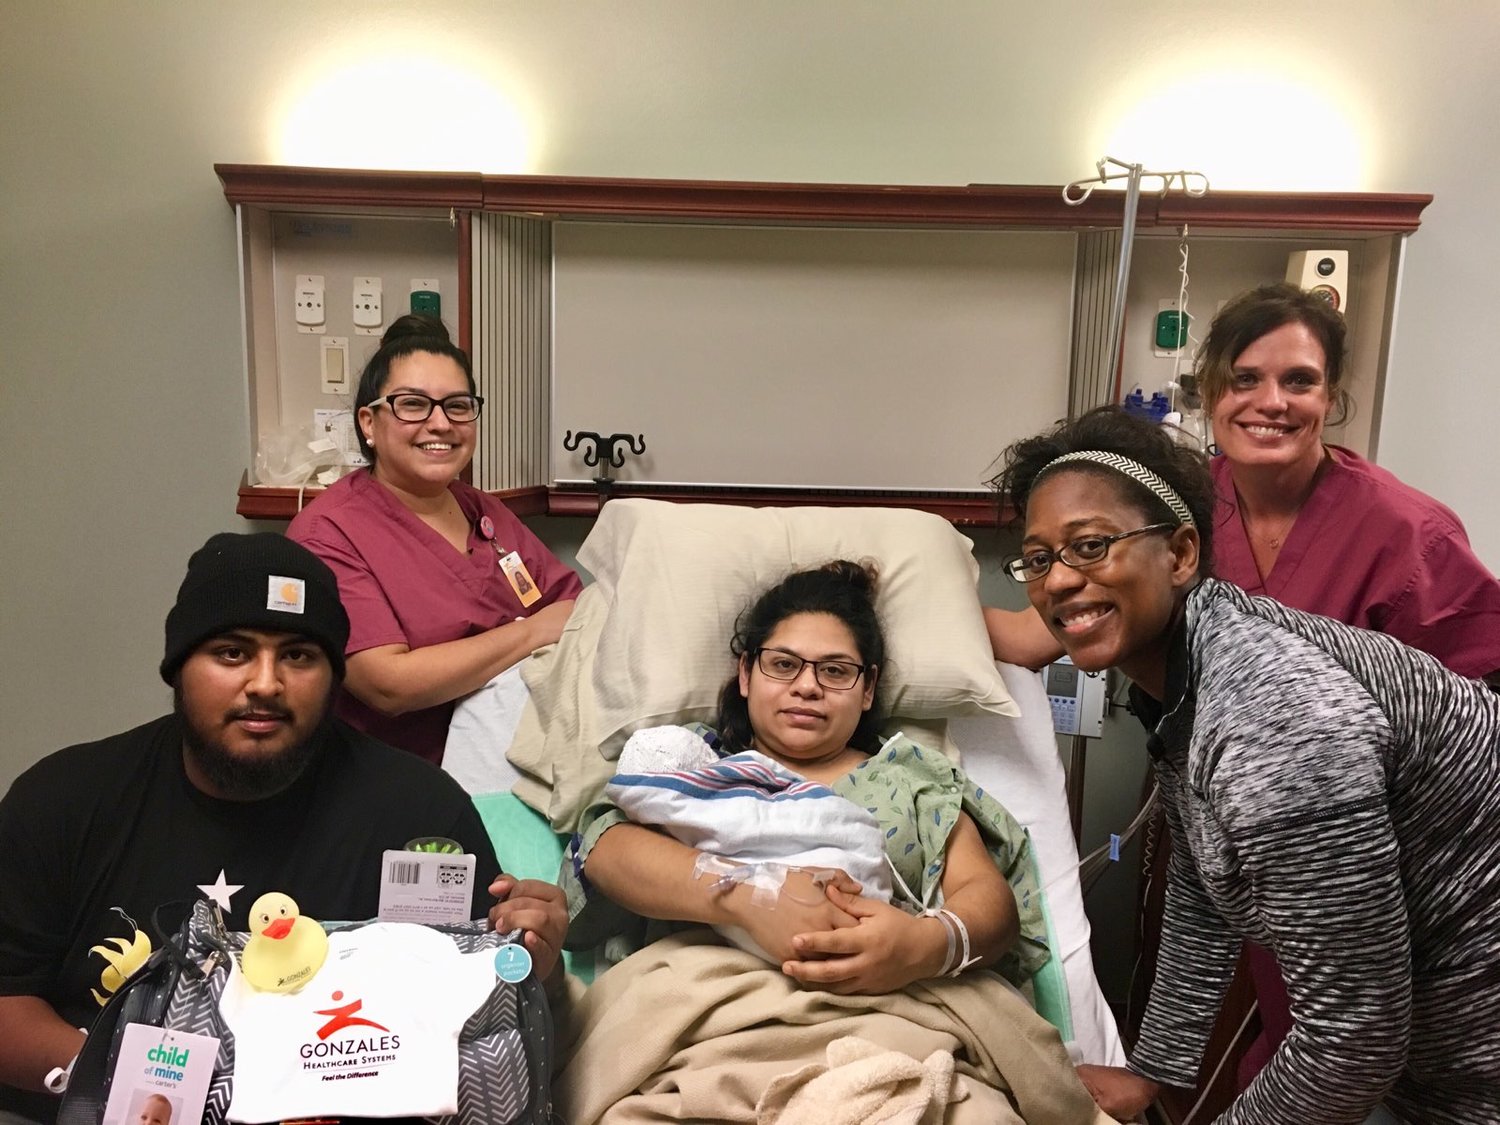 Pictured are Ramiro (father, bottom left), Amanda Sepulveda, LVN (top left), Yadira (mother) and Nalia (baby), Rikki Baldwin DO (bottom right) and Cindy Ackman, RN (top right).